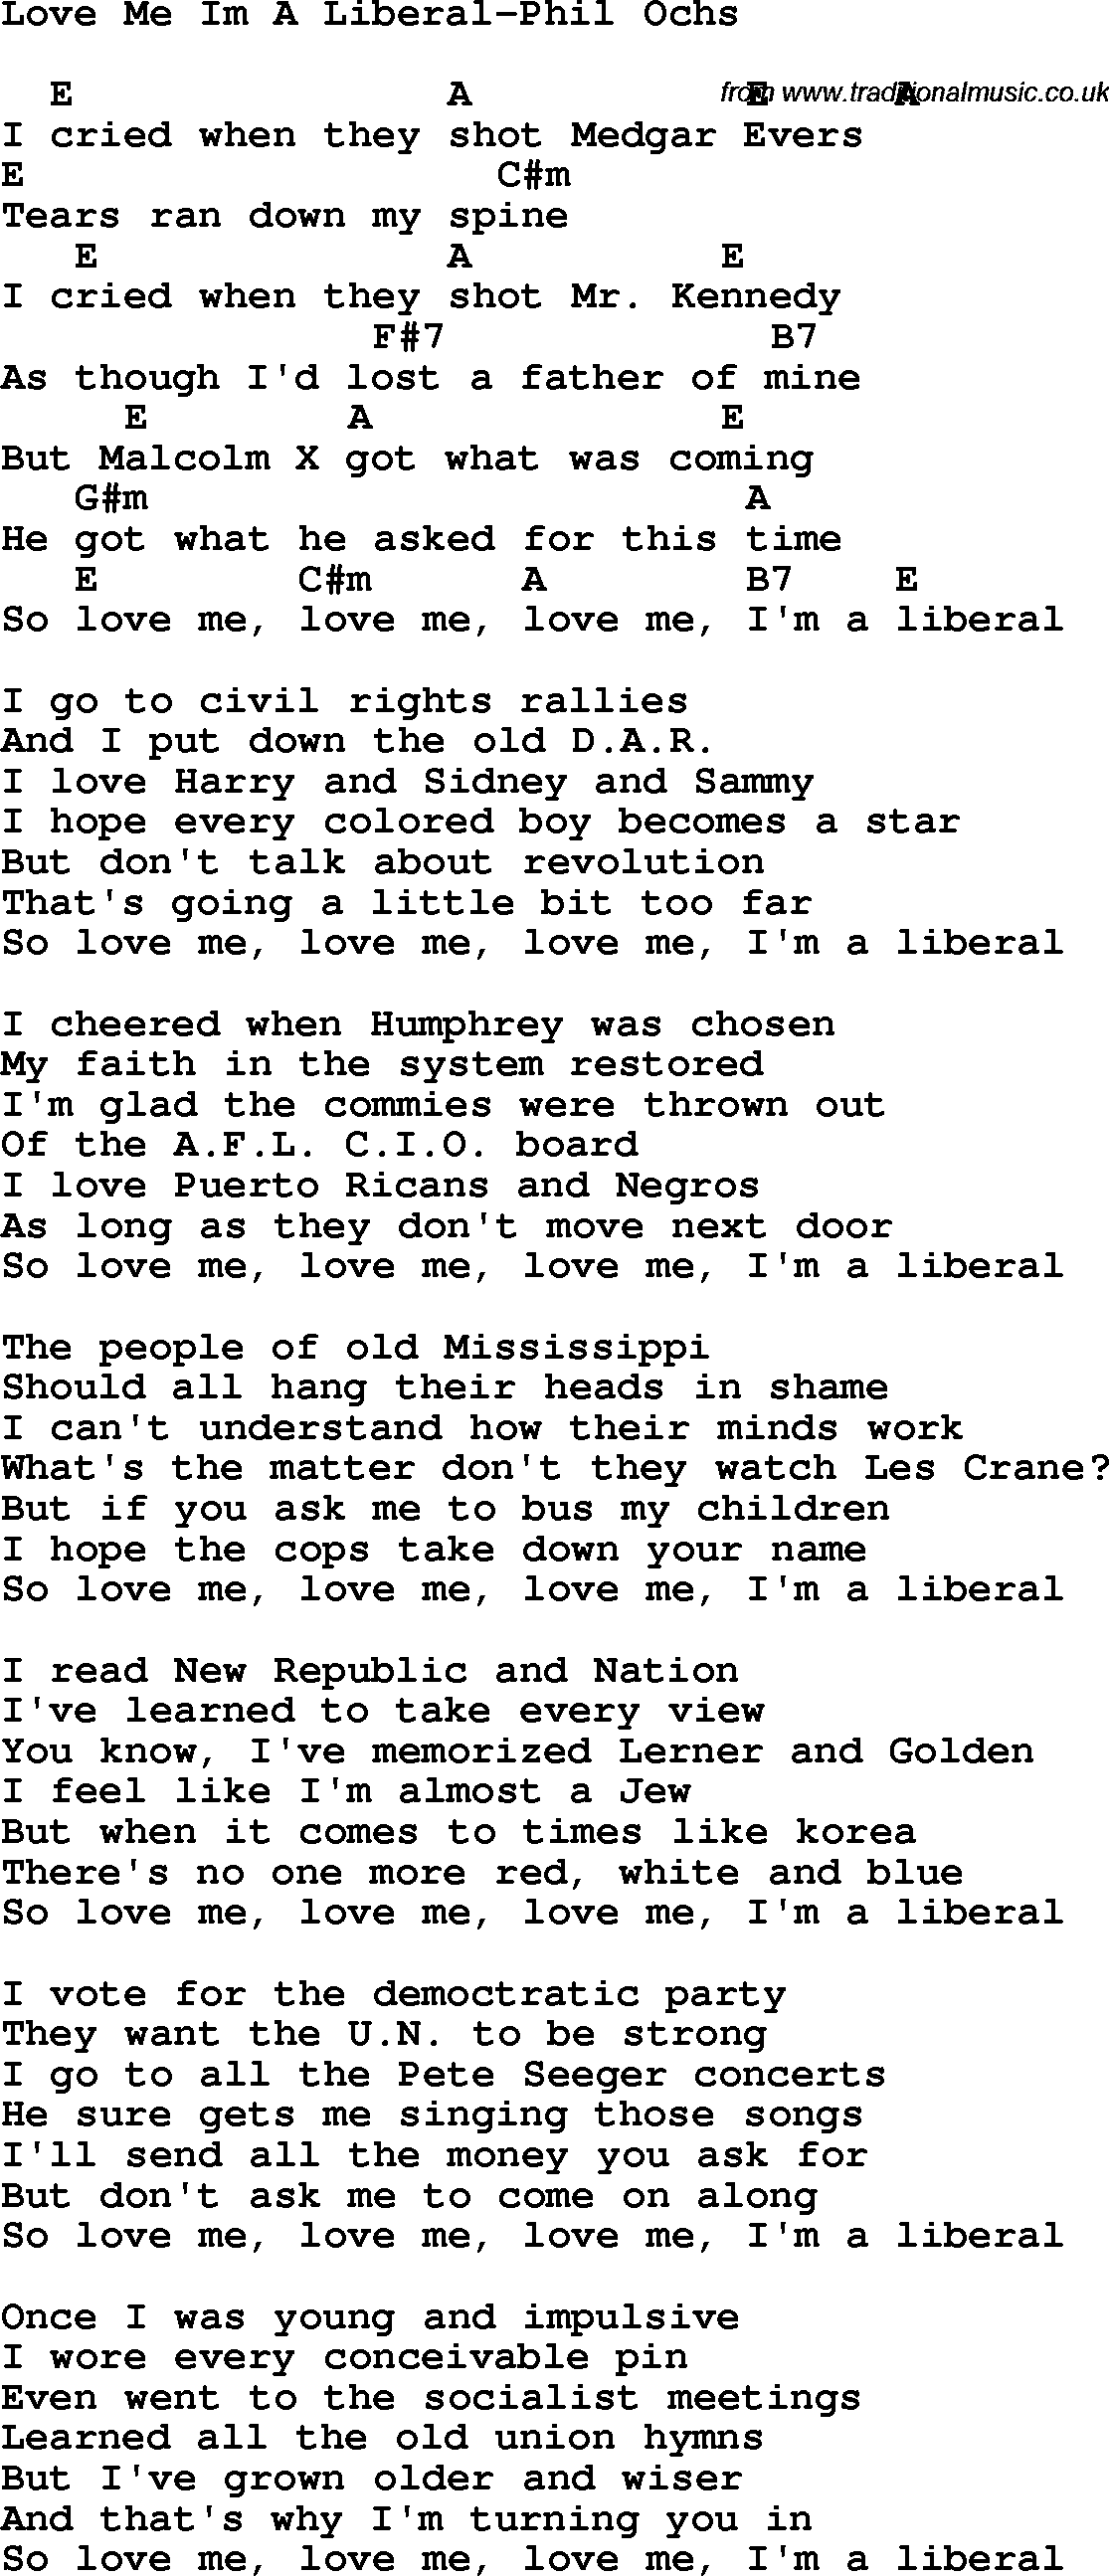 Protest Song Love Me Im A Liberal-Phil Ochs lyrics and chords